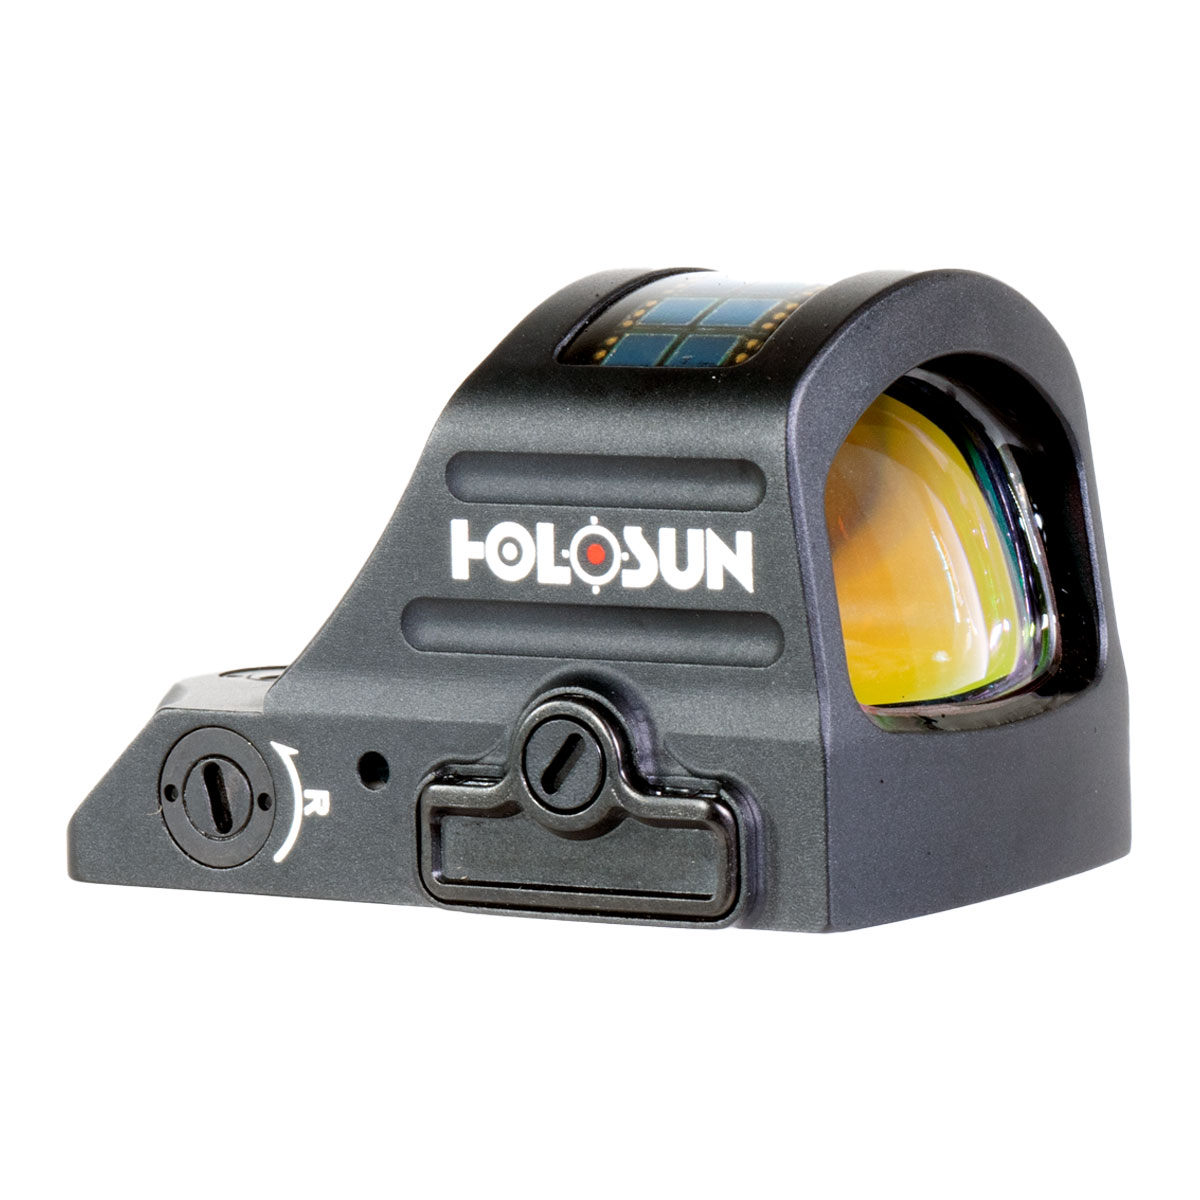 Holosun Technologies, 407C-X2, Red Dot, 2 MOA, Black, Side Battery, Solar Failsafe, Mount Not Included Single Reticle Option